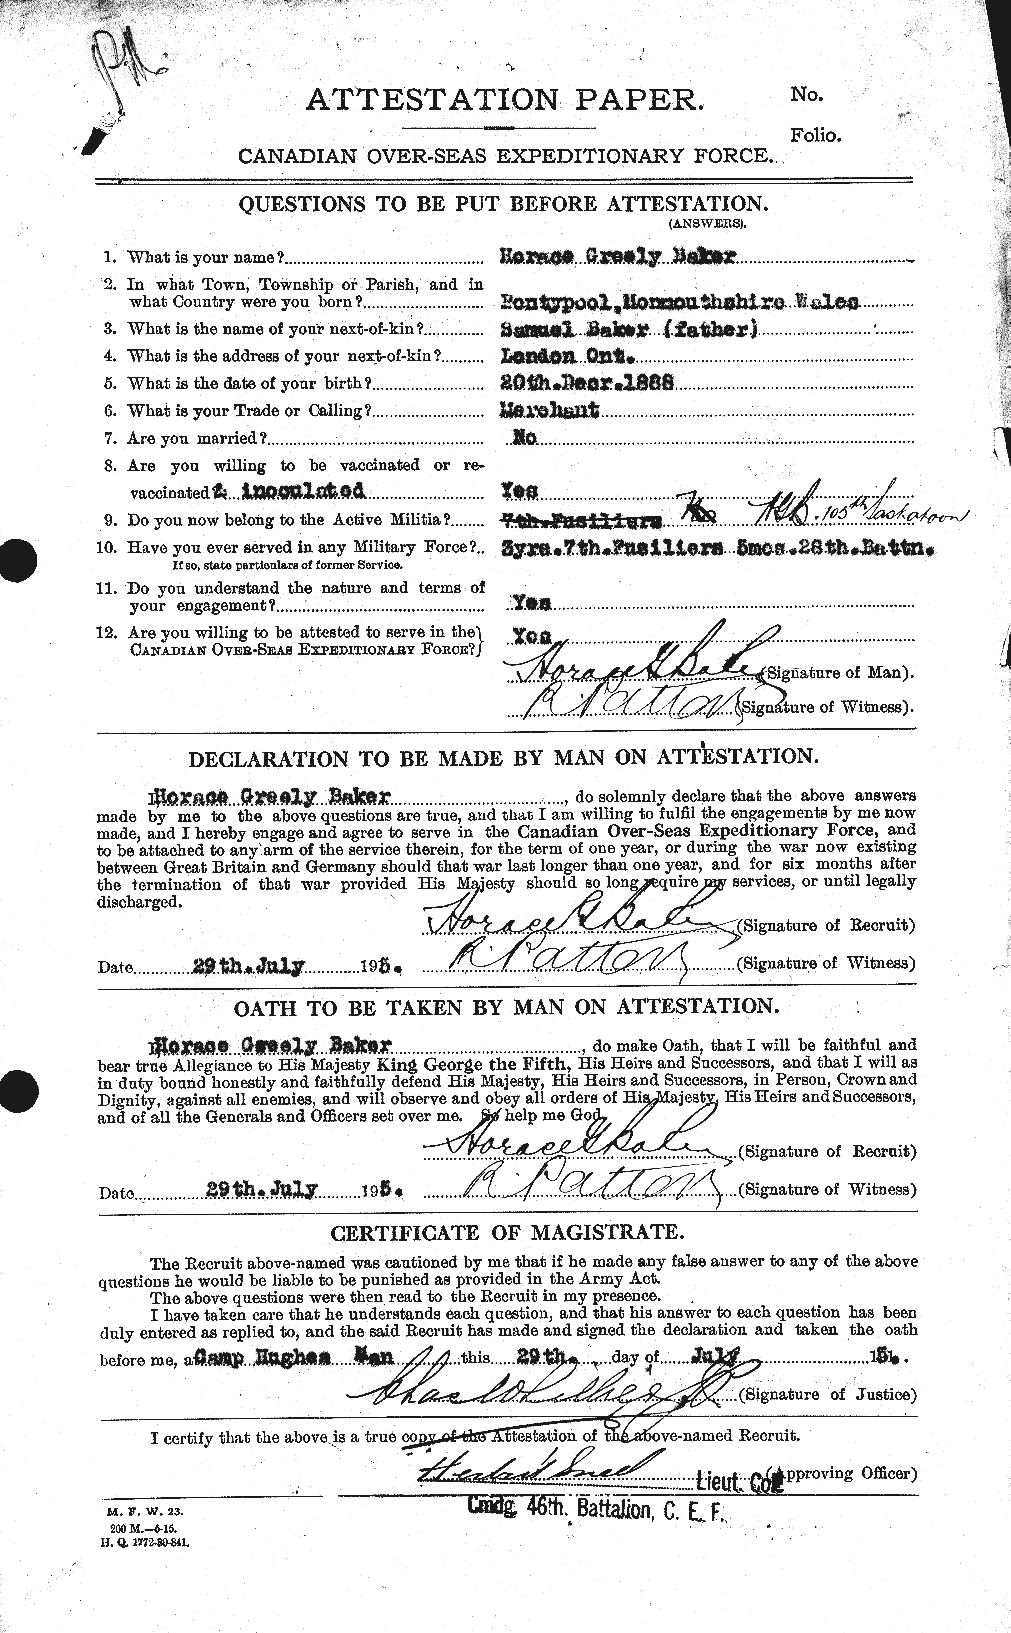 Personnel Records of the First World War - CEF 216101a